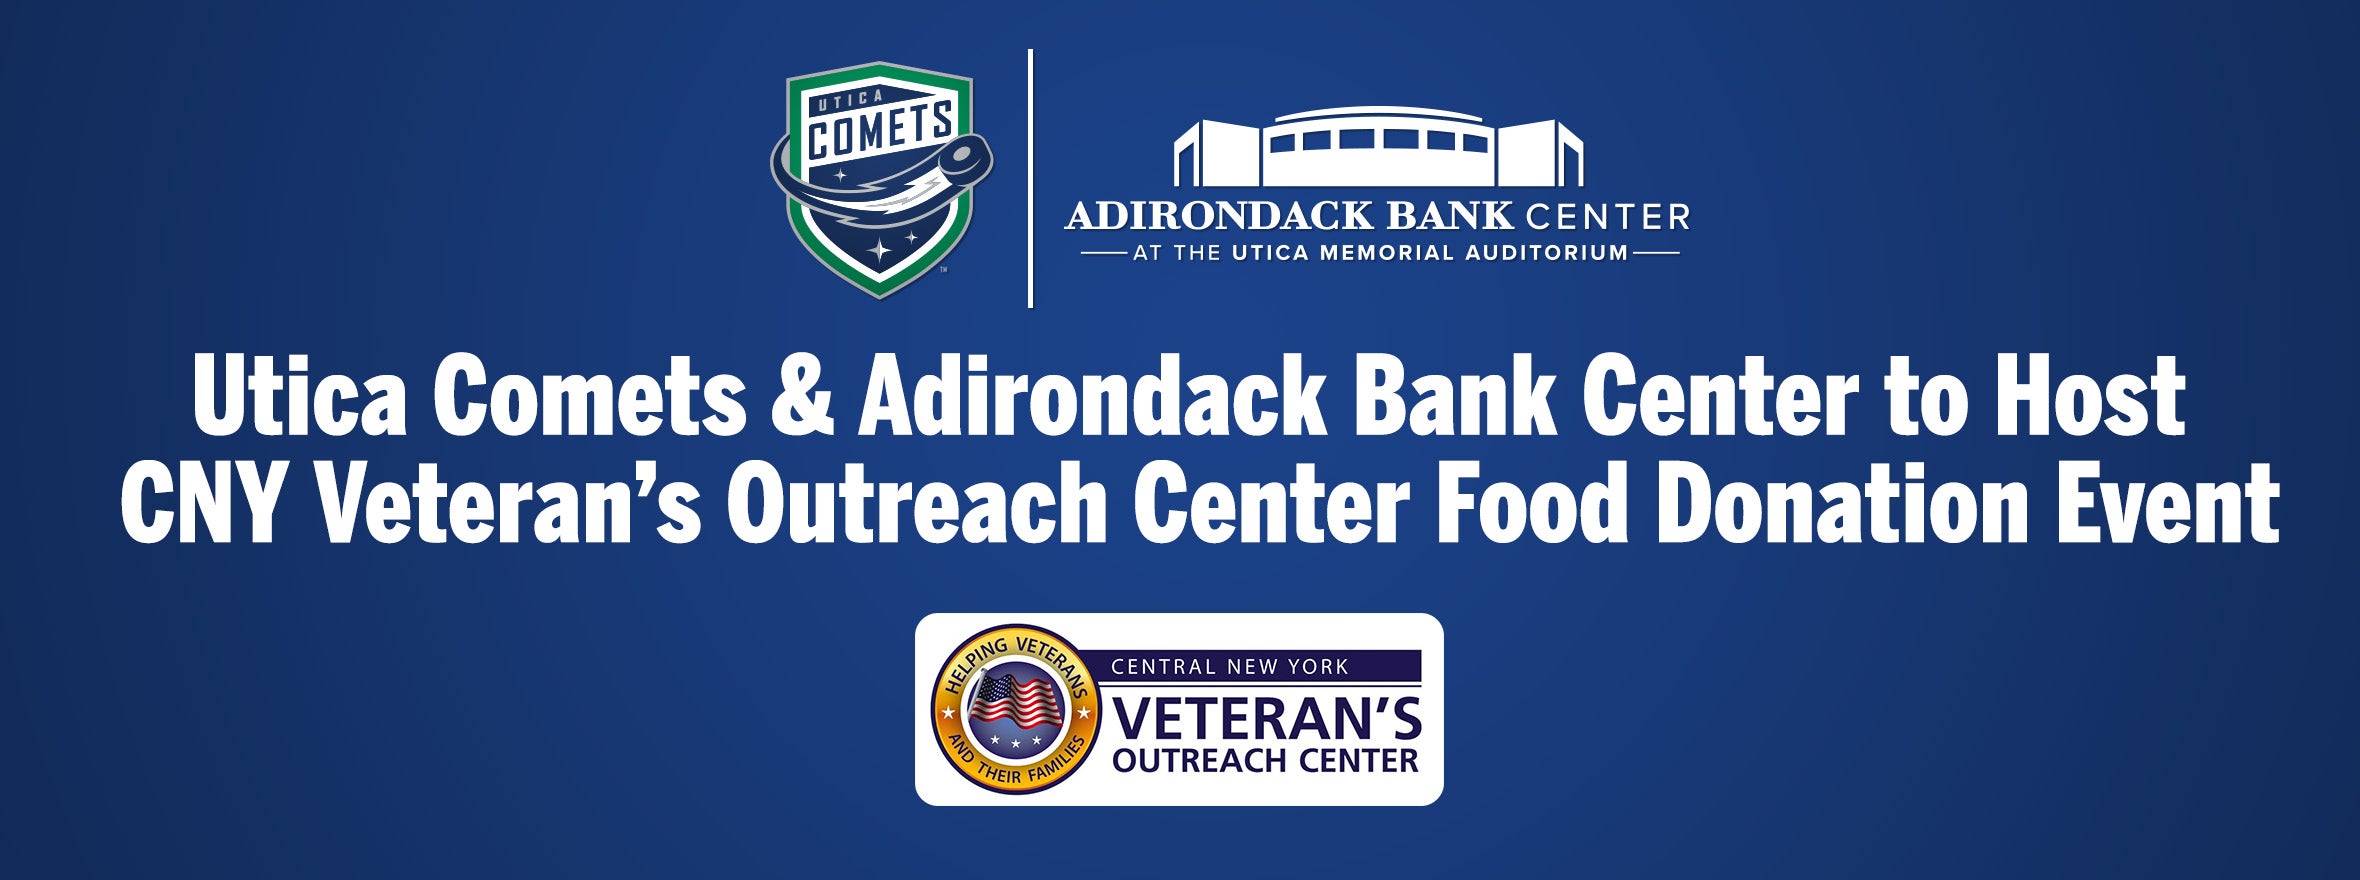 COMETS AND ADIRONDACK BANK CENTER TO HOST CNY VETERAN’S OUTREACH CENTER FOOD DONATION EVENT